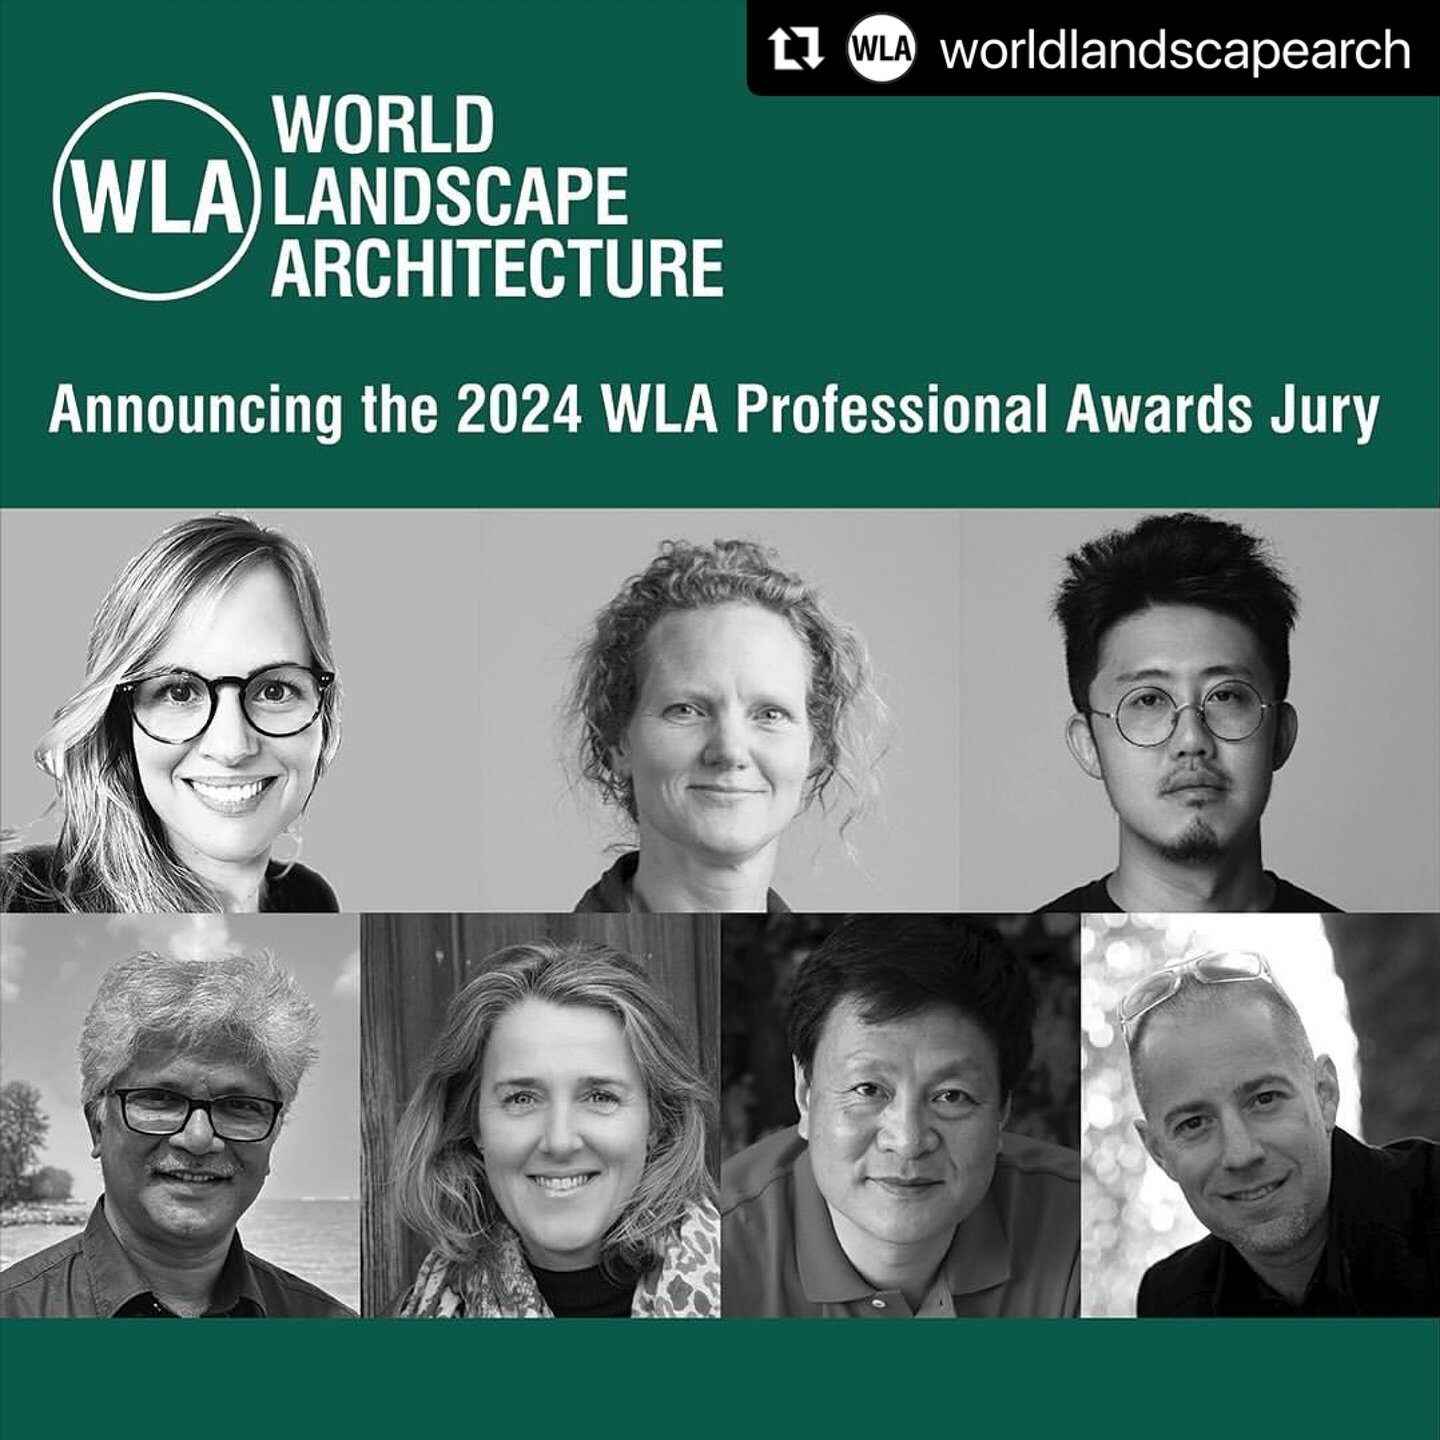 #Repost @worldlandscapearch with @use.repost

・・・
Announcing the jury for the 2024 WLA Professional Awards

We are pleased to announce the following jurors for the 2024 WLA Professional Awards, which will open for registration on January 16, 2024.

L